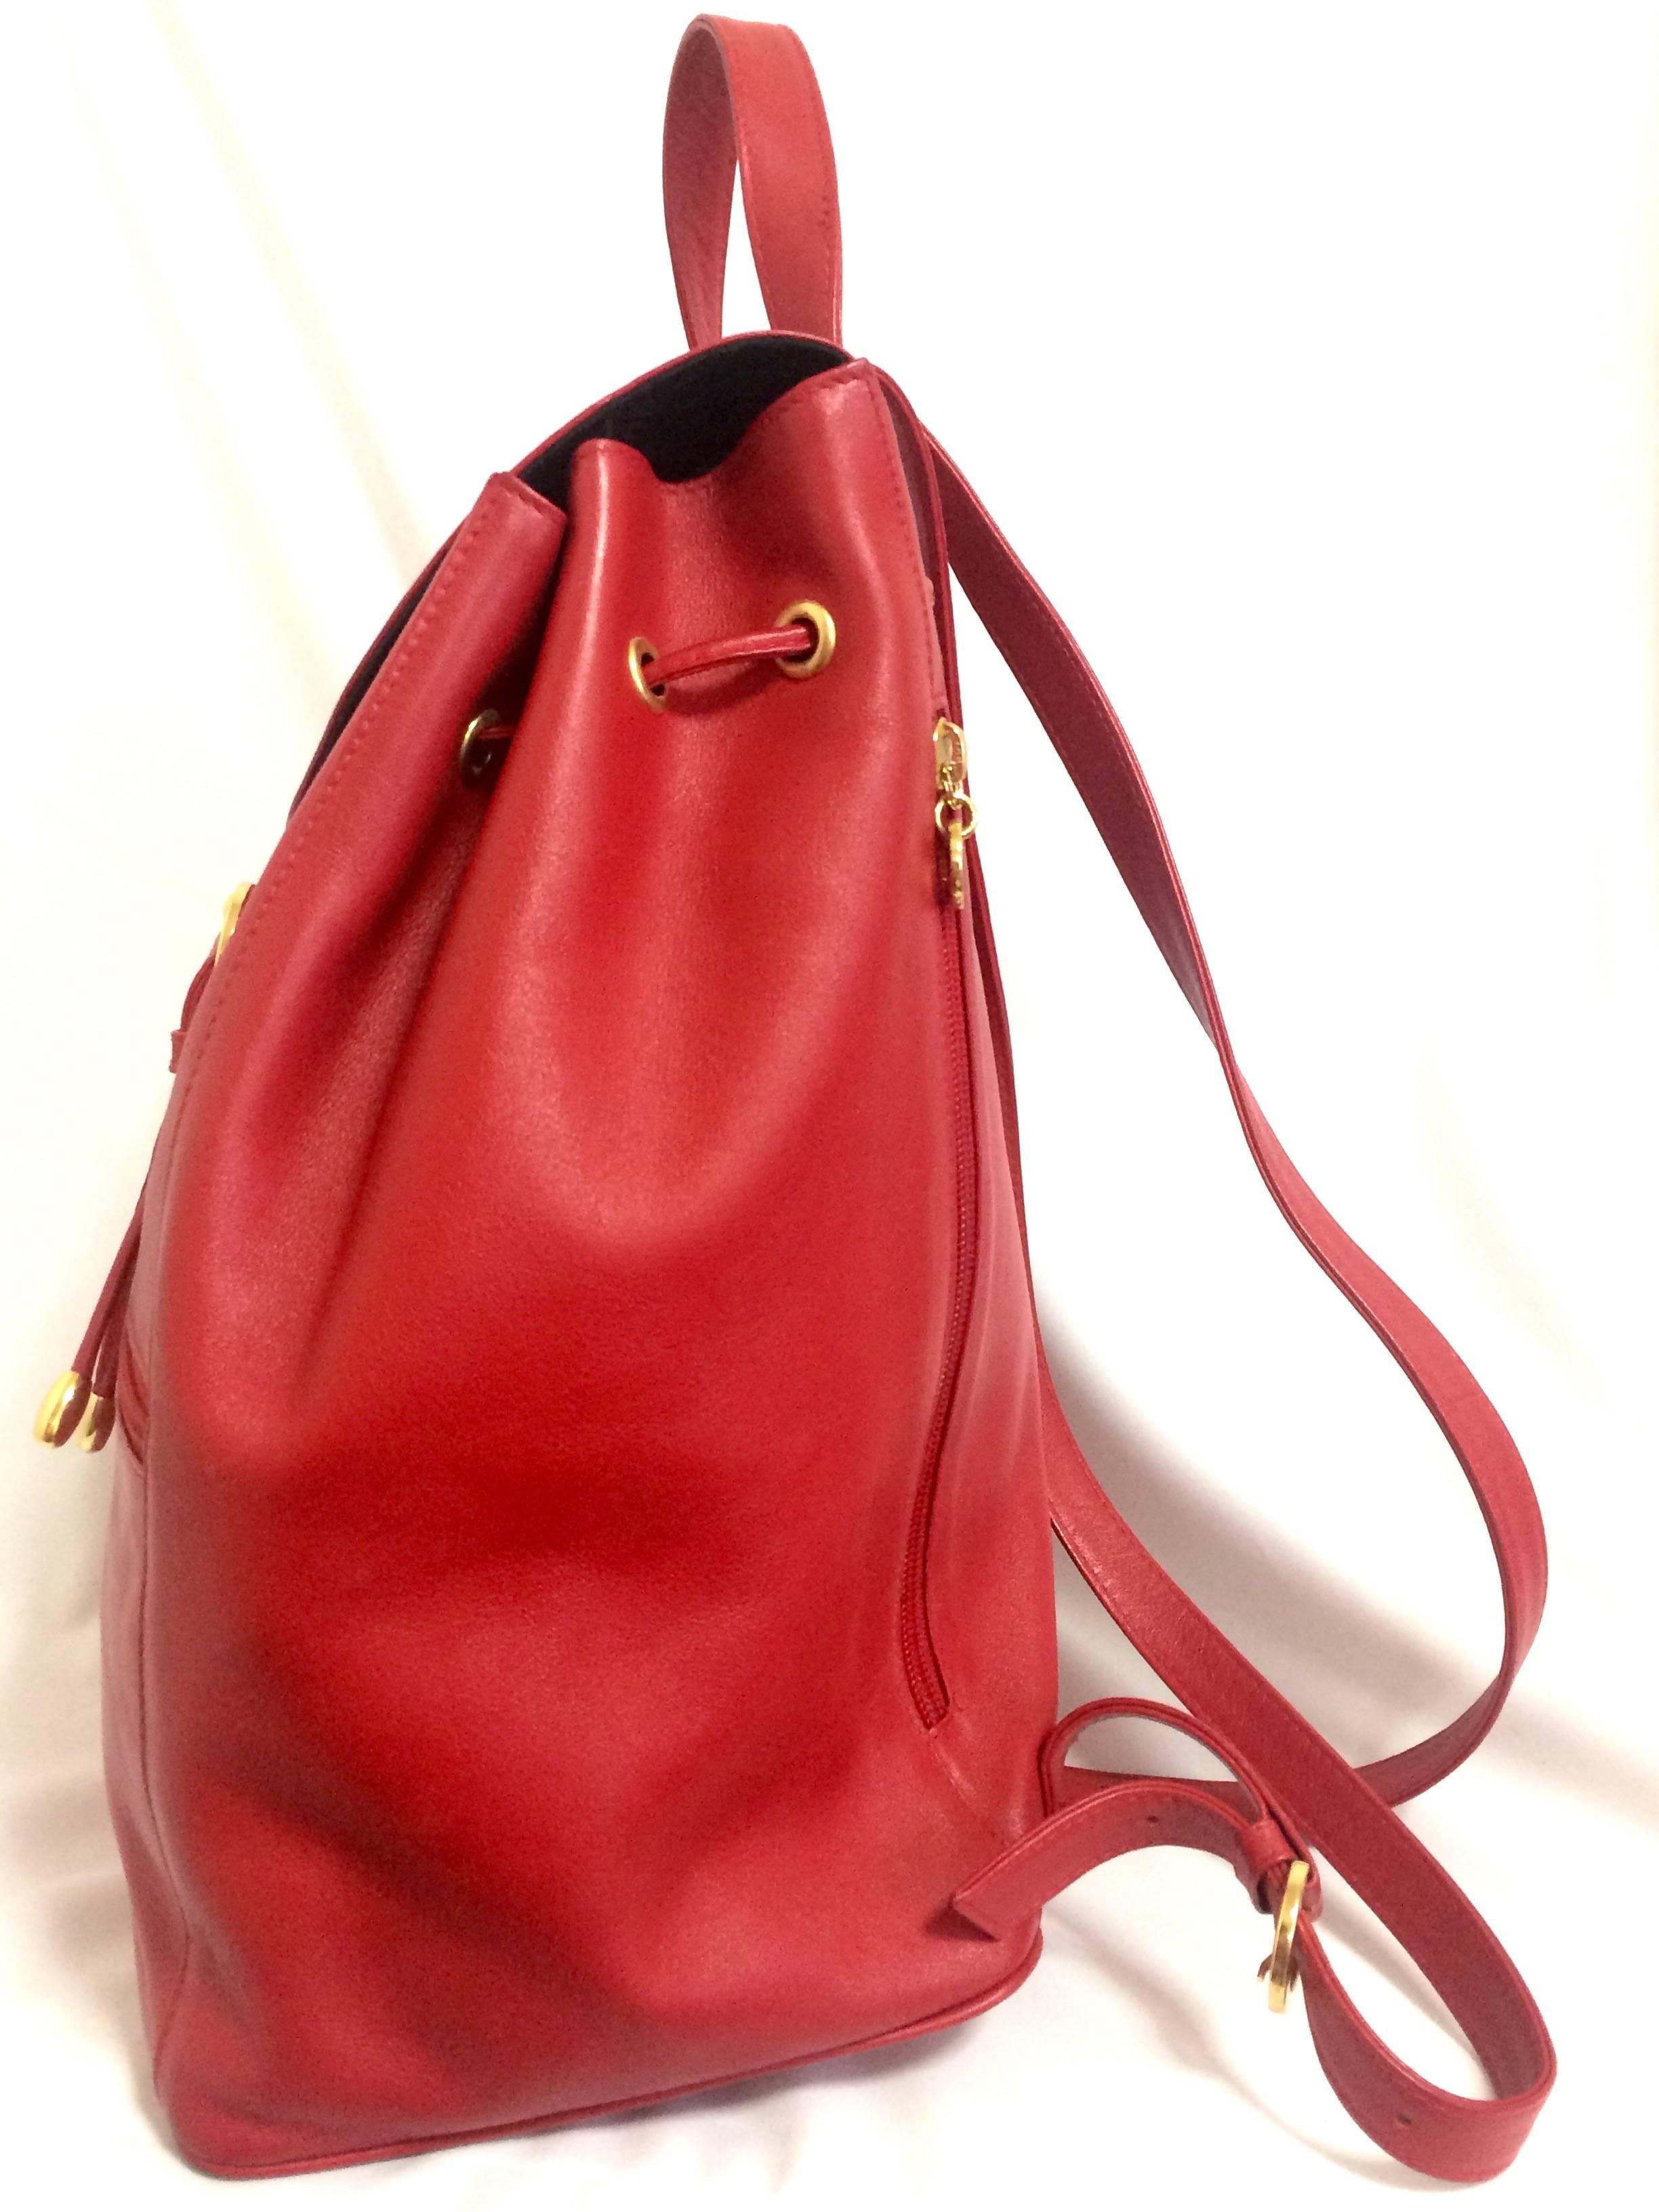 Women's or Men's Vintage Paloma Picasso red leather backpack with golden logo motifs. Classic bag